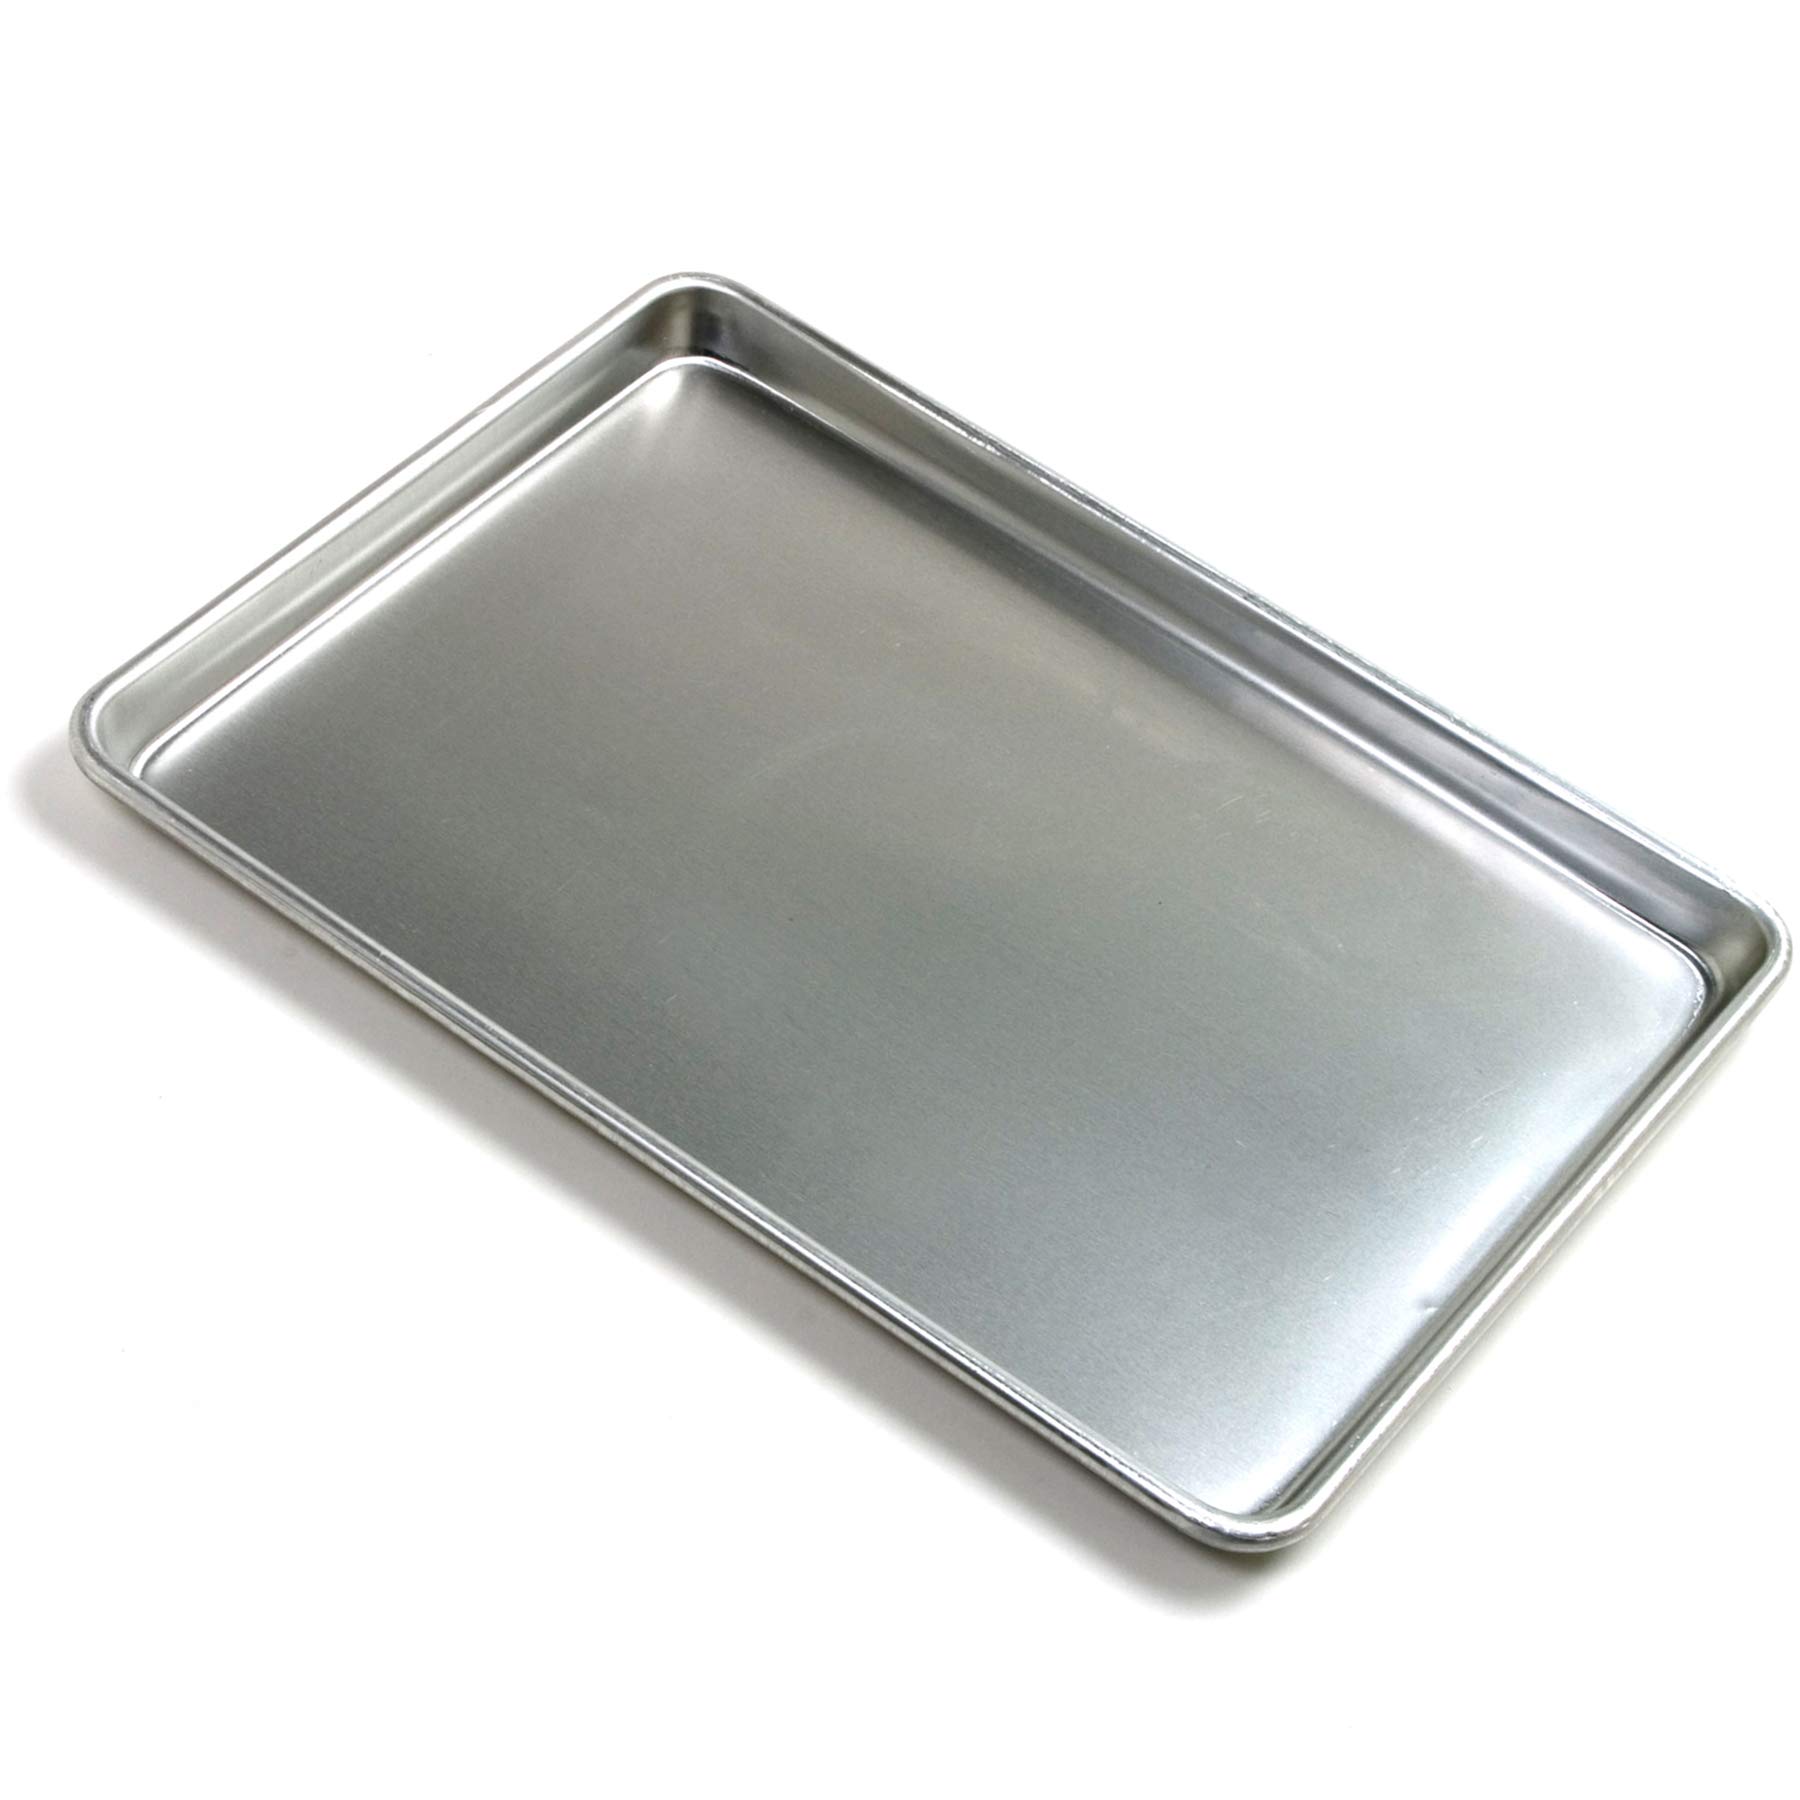 Norpro 18 Inch x 13 Inch Commercial Grade Aluminum Jelly Roll Pan